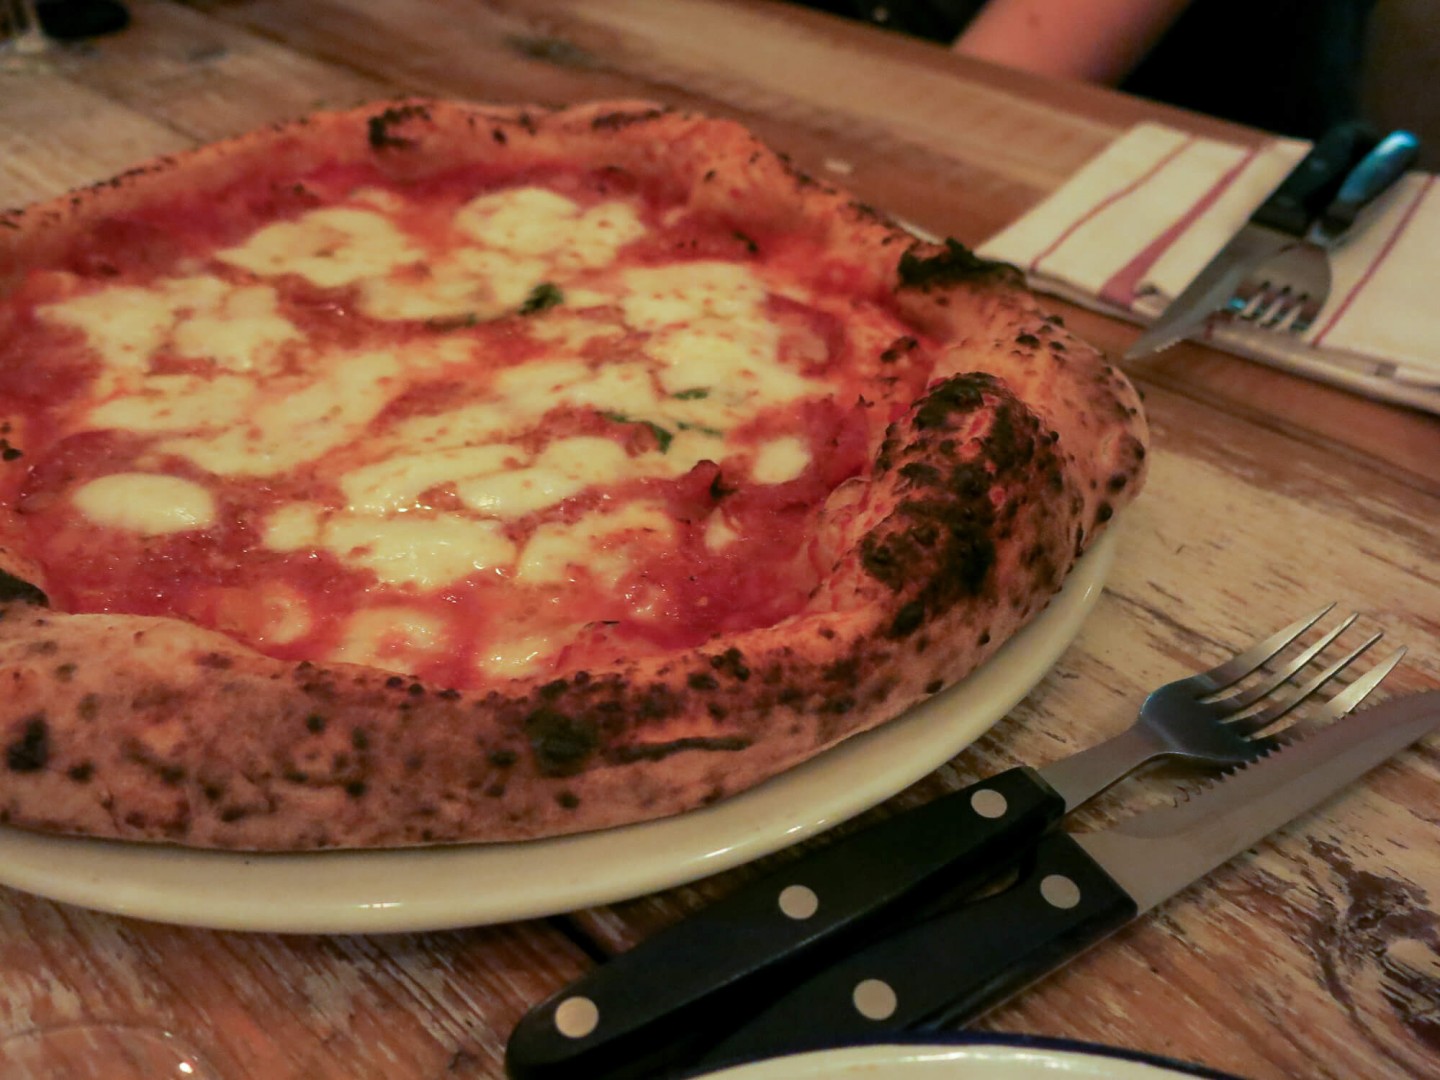 Delicious pizza at Meridionale in Fulham, London.